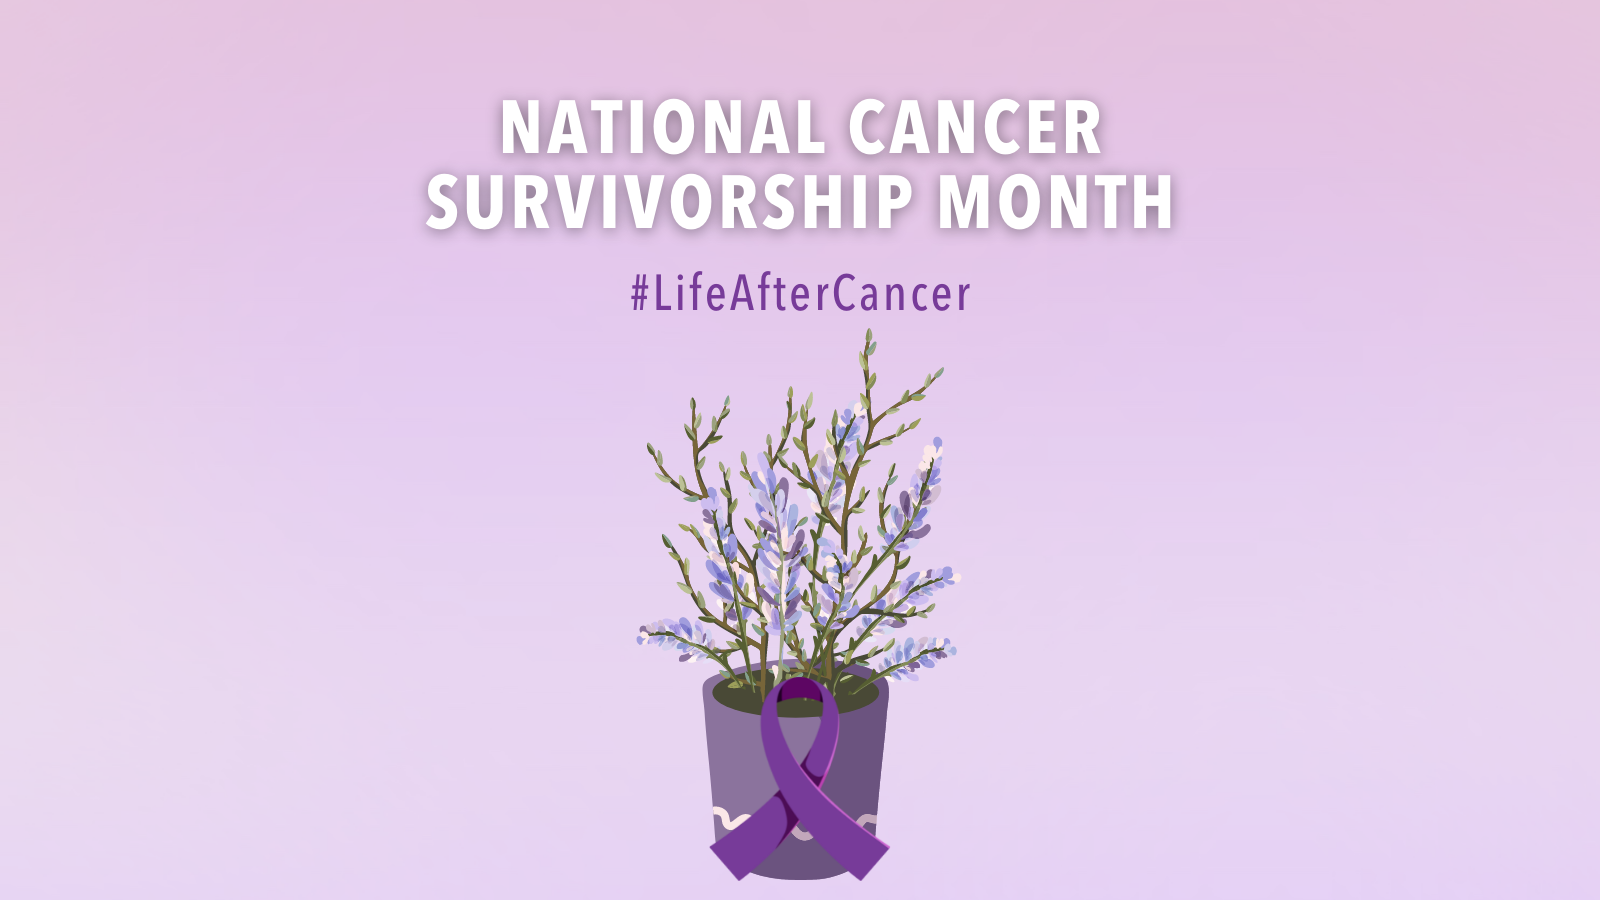 Image of purple potted plant, with purple cancer ribbon on an a pink and purple background. Text above image states "National Cancer Survivorship Month" #LifeAfterCancer